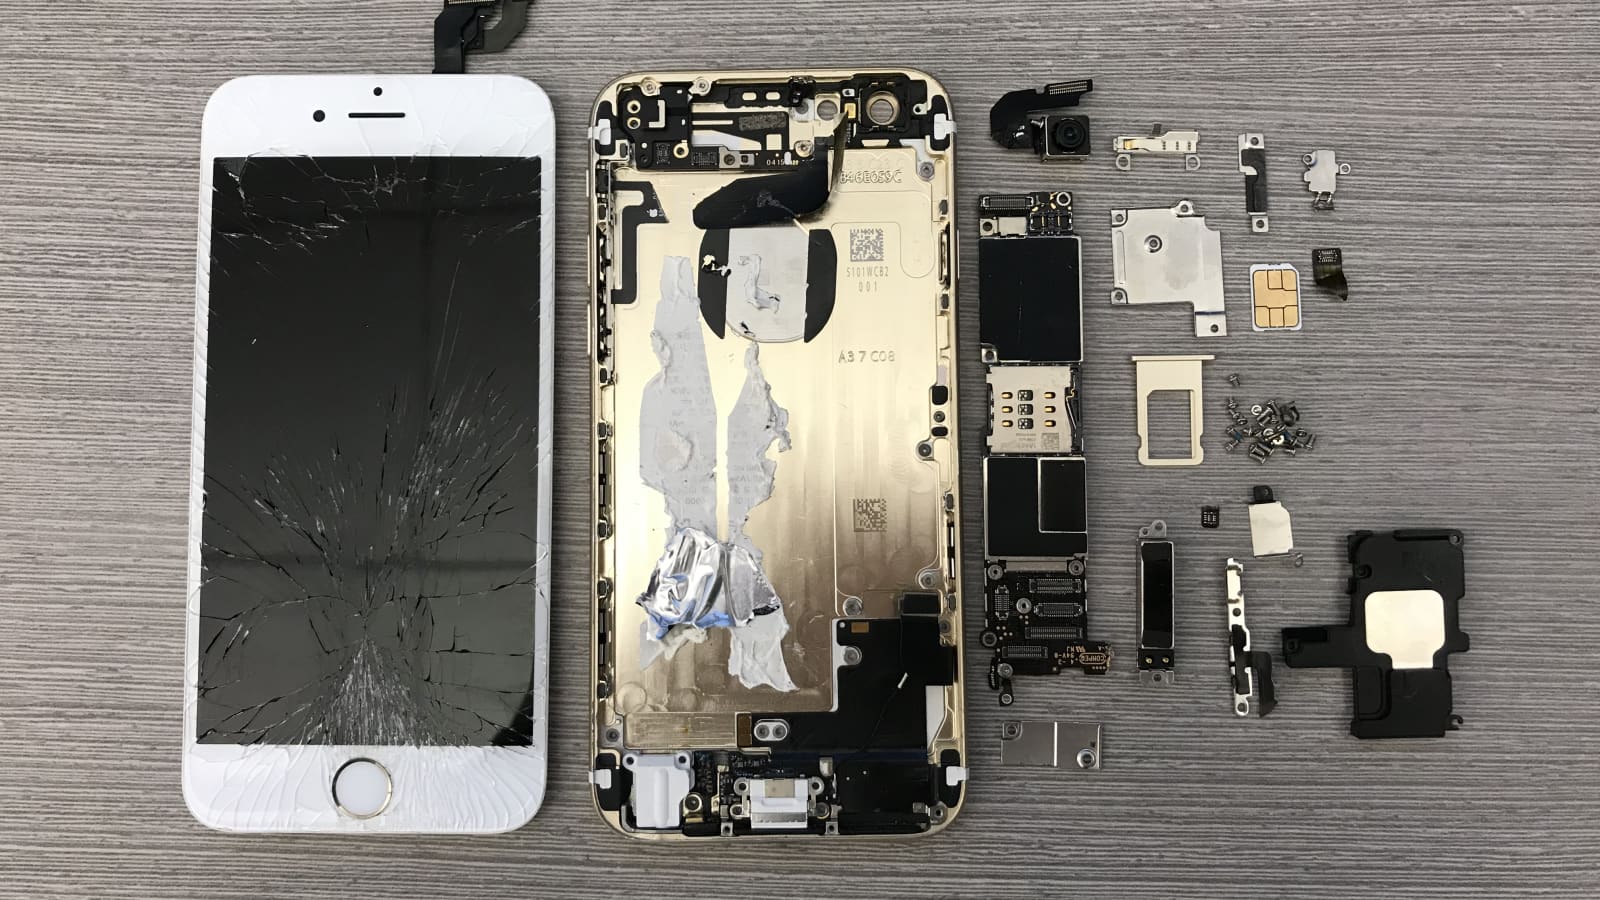 Inside an Apple iPhone: Where parts and materials come from